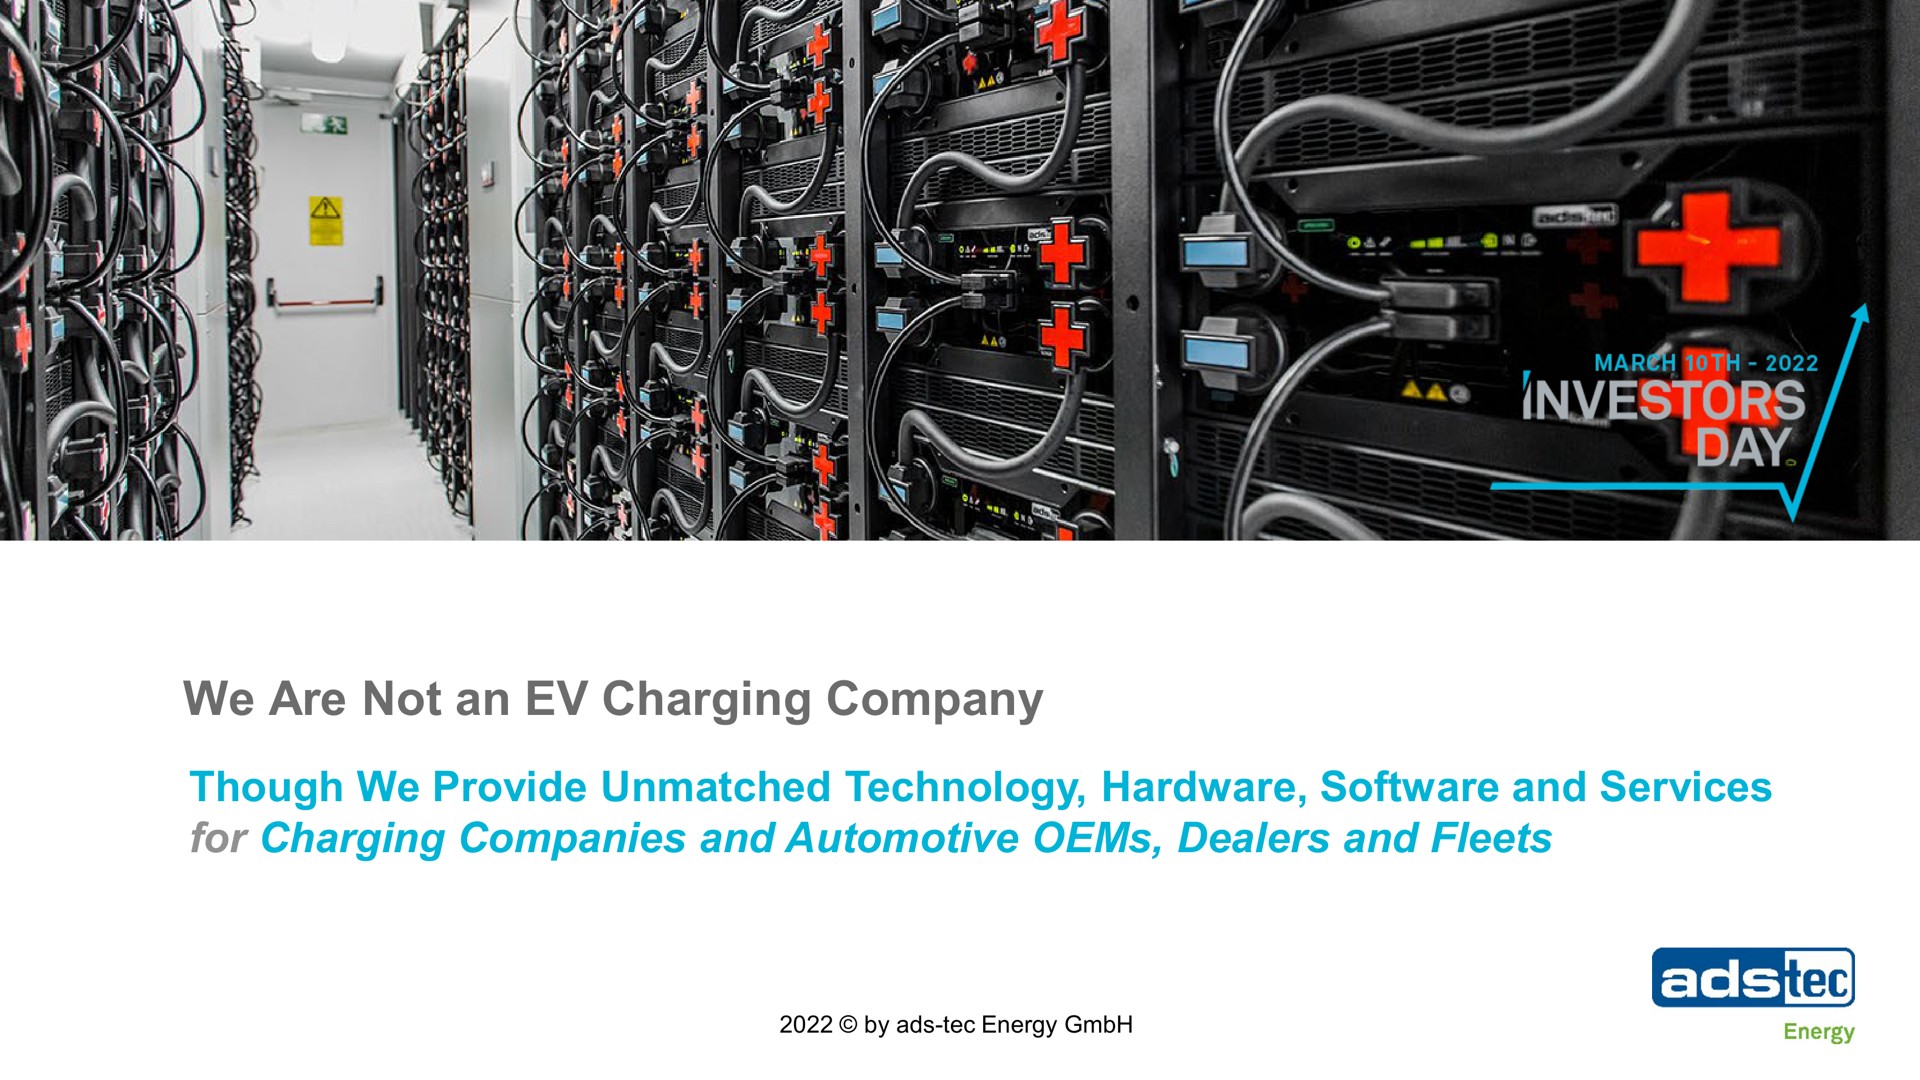 we are not an charging company though we provide unmatched technology hardware and services for charging companies and automotive dealers and fleets investors day | ads-tec Energy